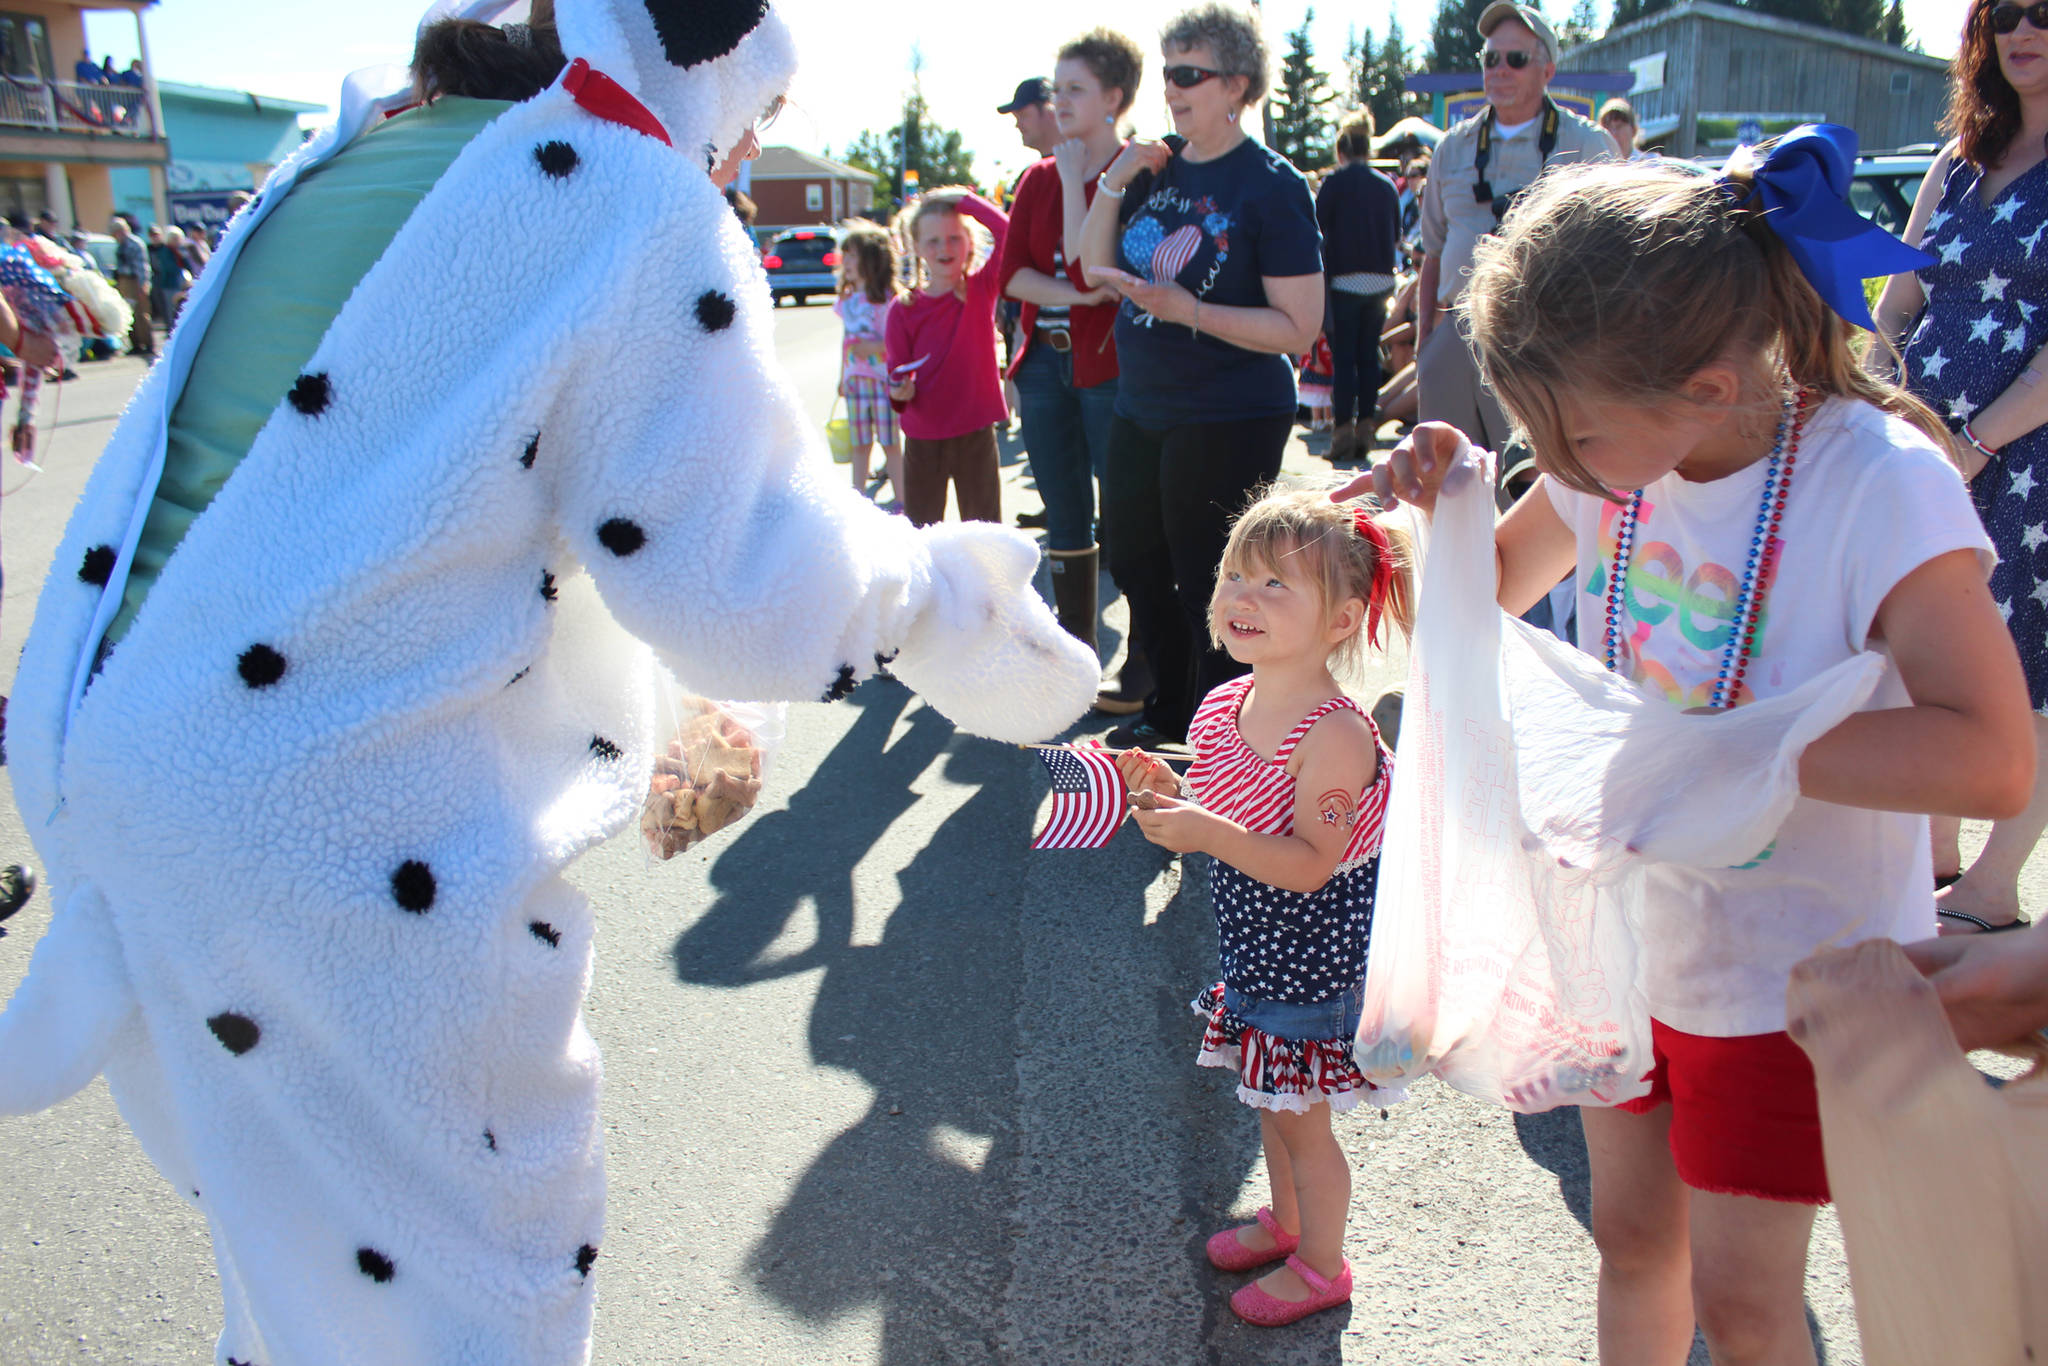 A member of the Homer Animal Friends hands out a dog treat to a young girl during this year’s Independence Day parade Wednesday, July 4, 2018 in Homer, Alaska. (Photo by Megan Pacer/Homer News)